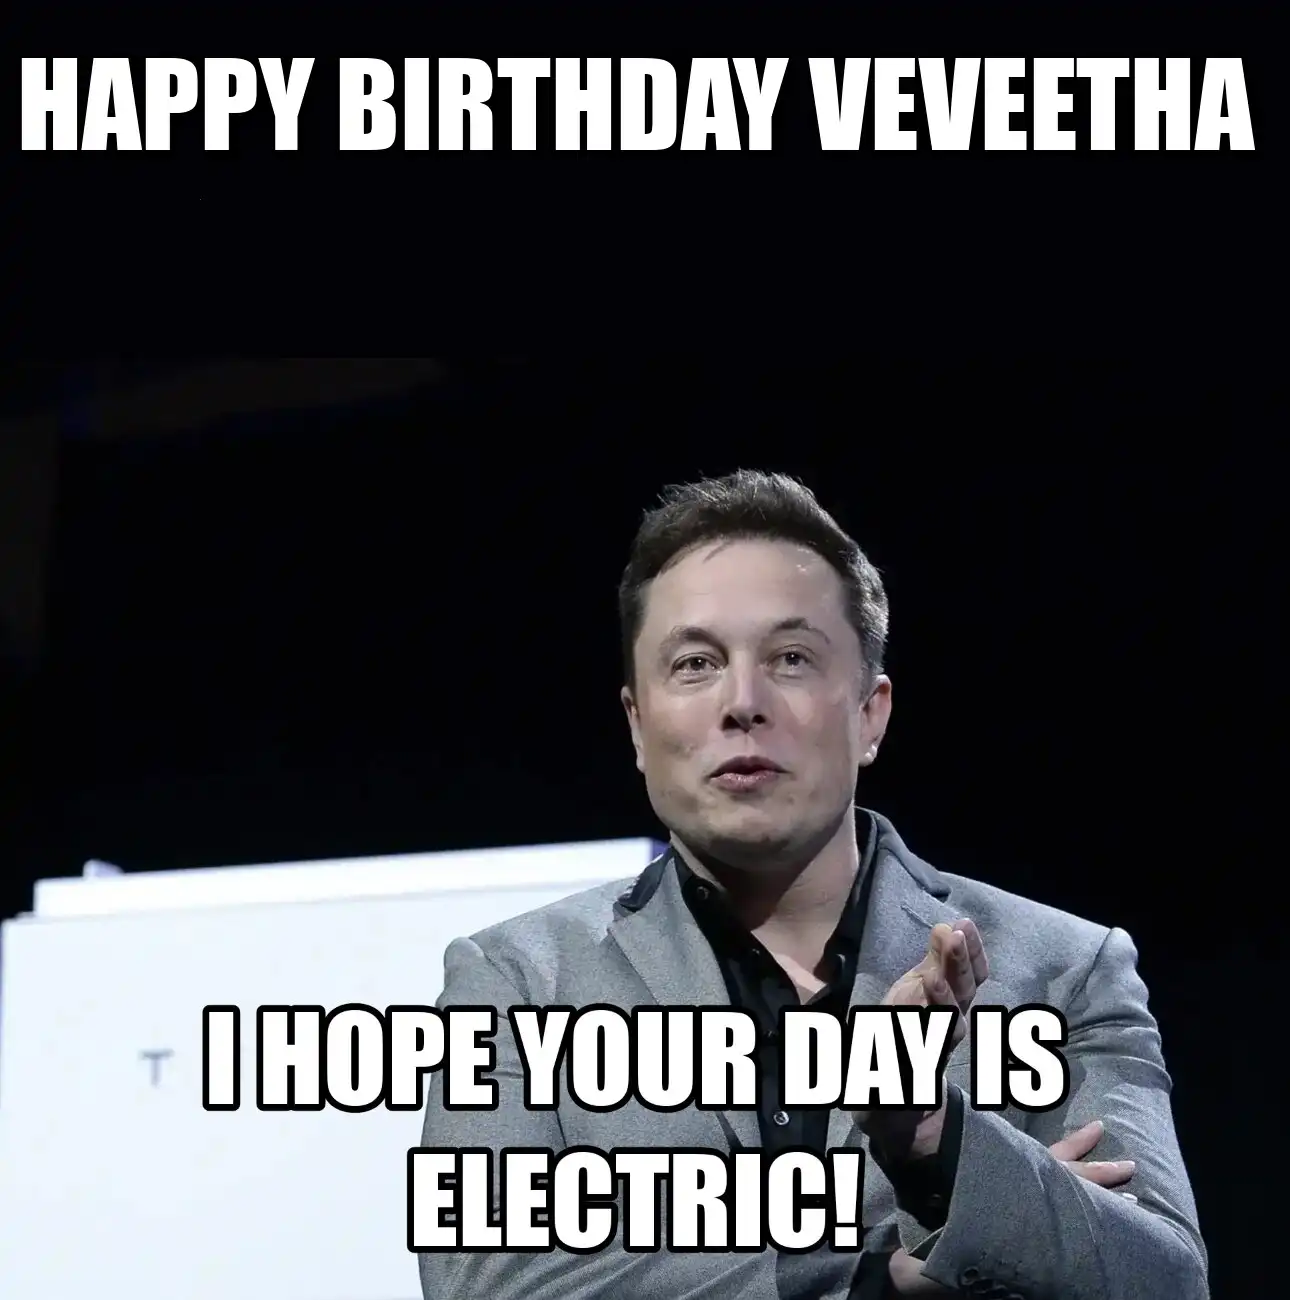 Happy Birthday Veveetha I Hope Your Day Is Electric Meme